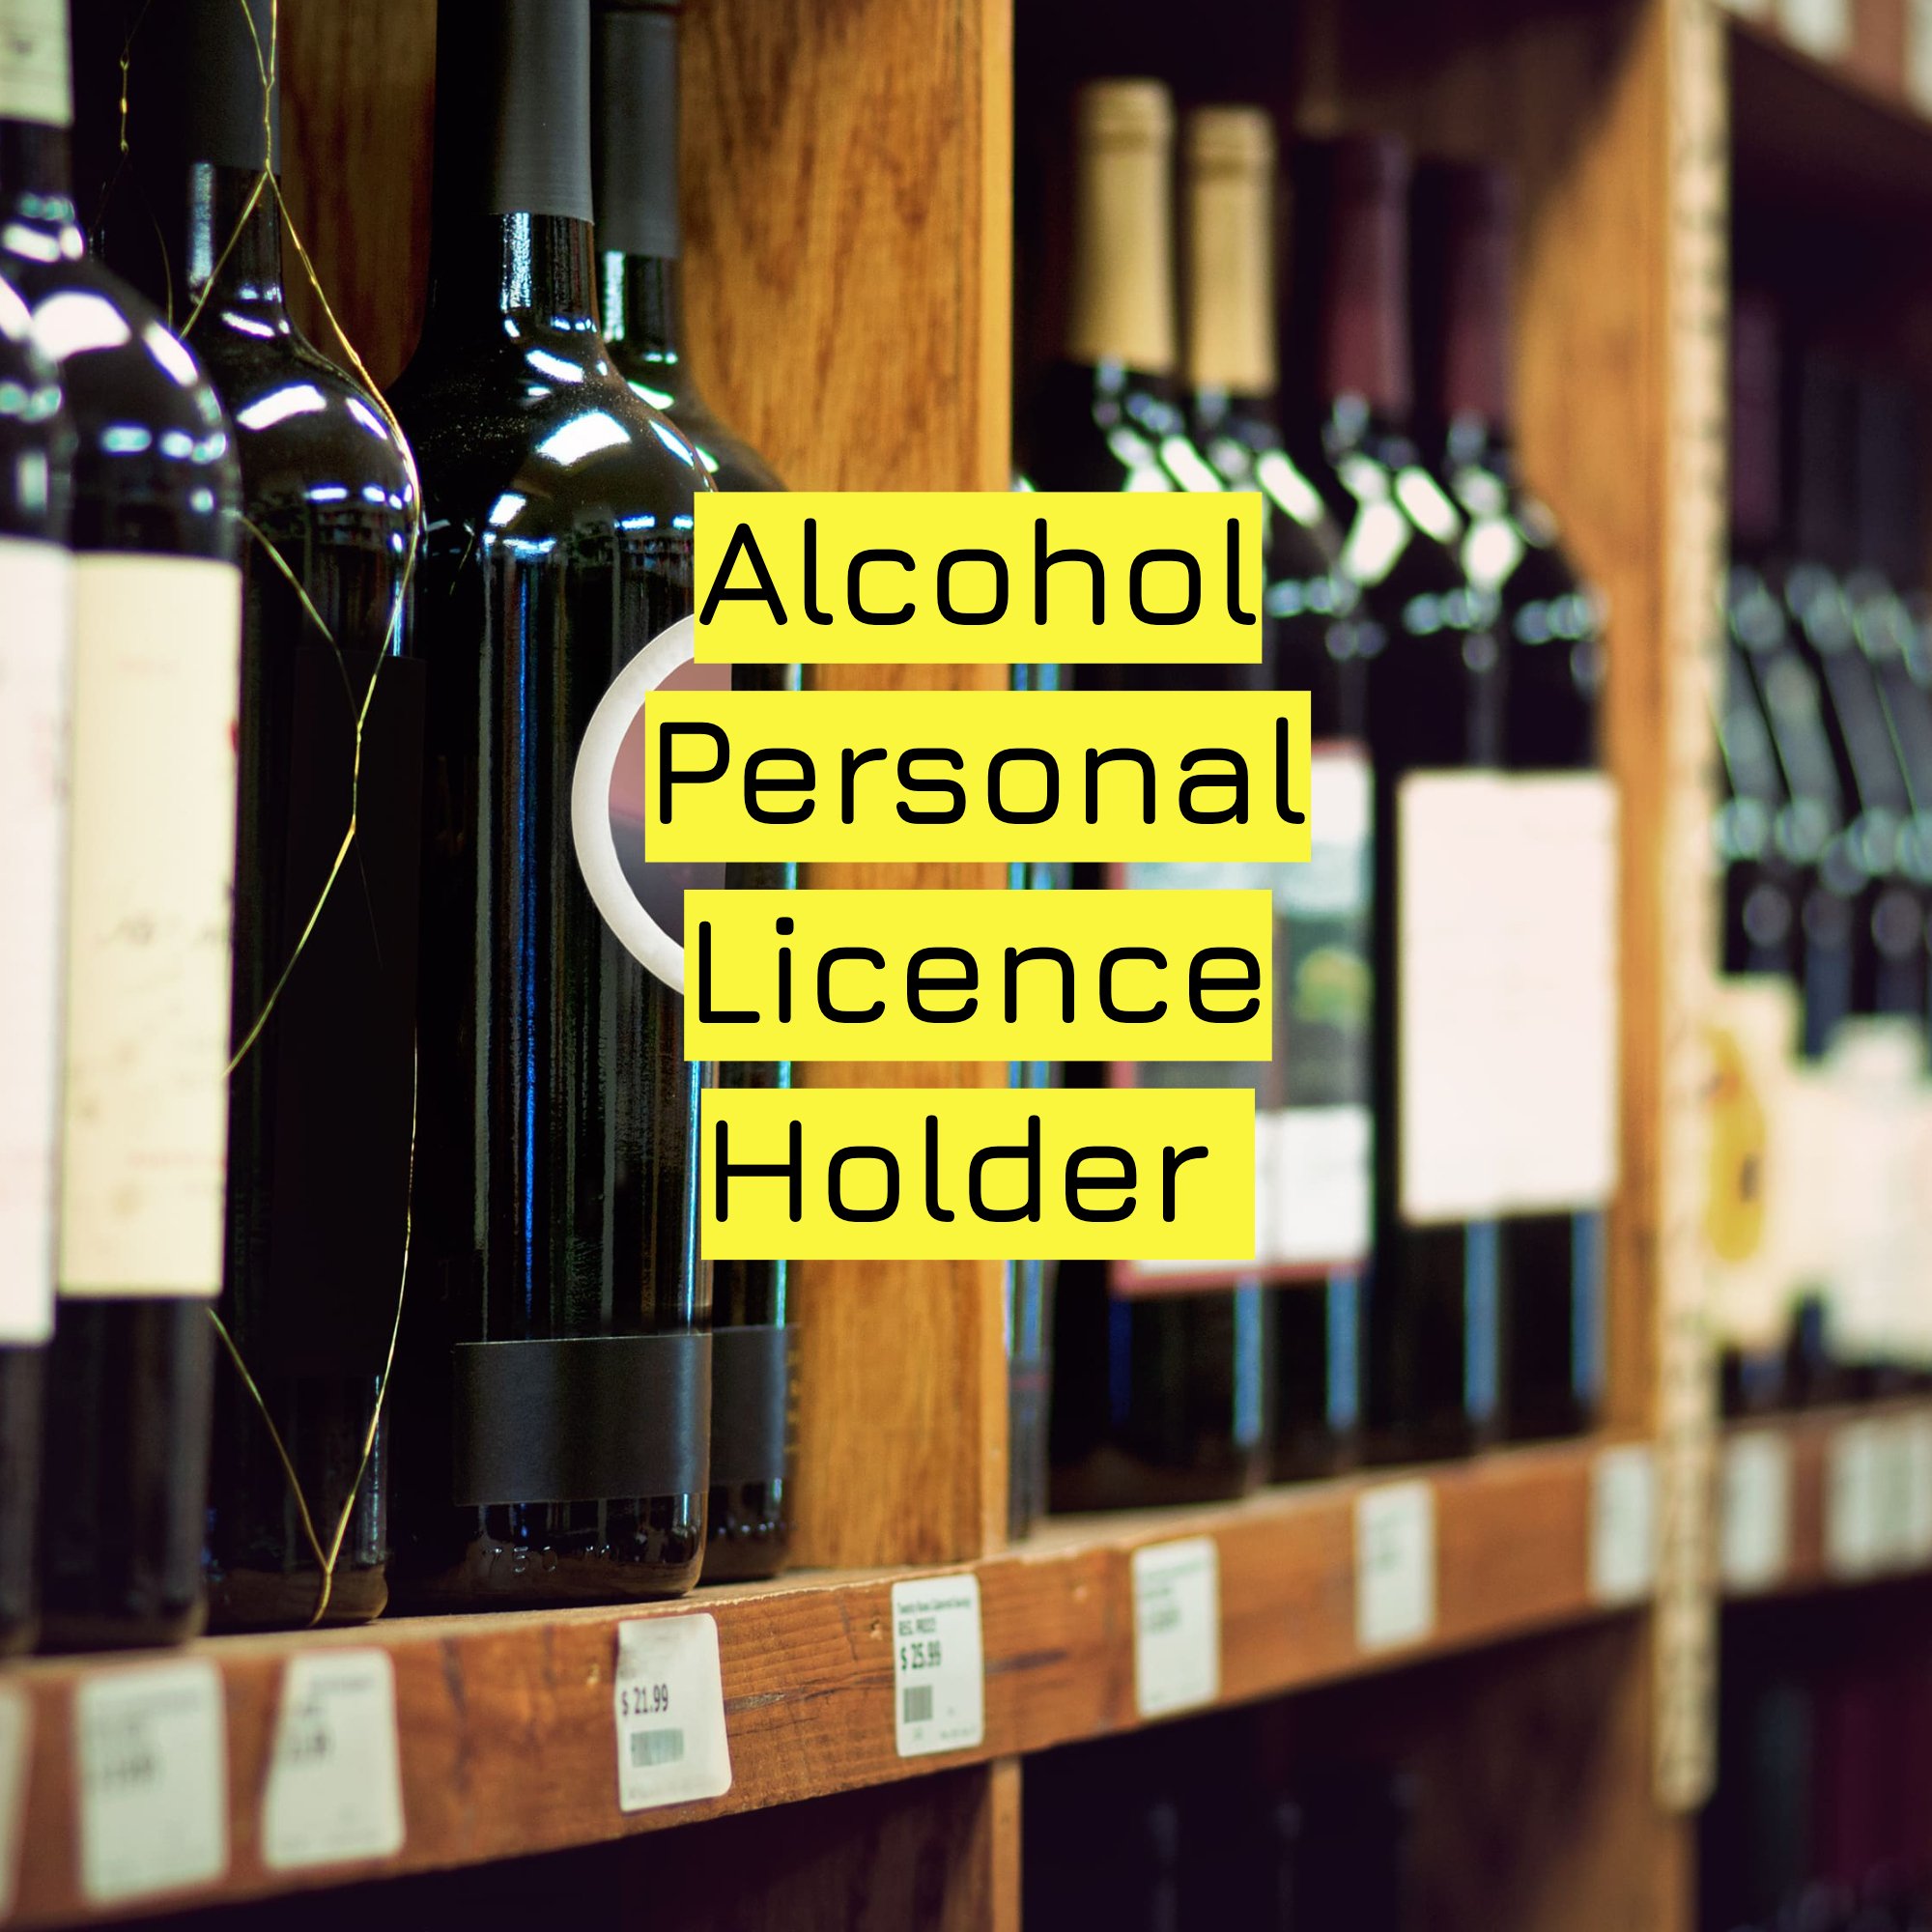 Alcohol Personal Licence Holder .jpg